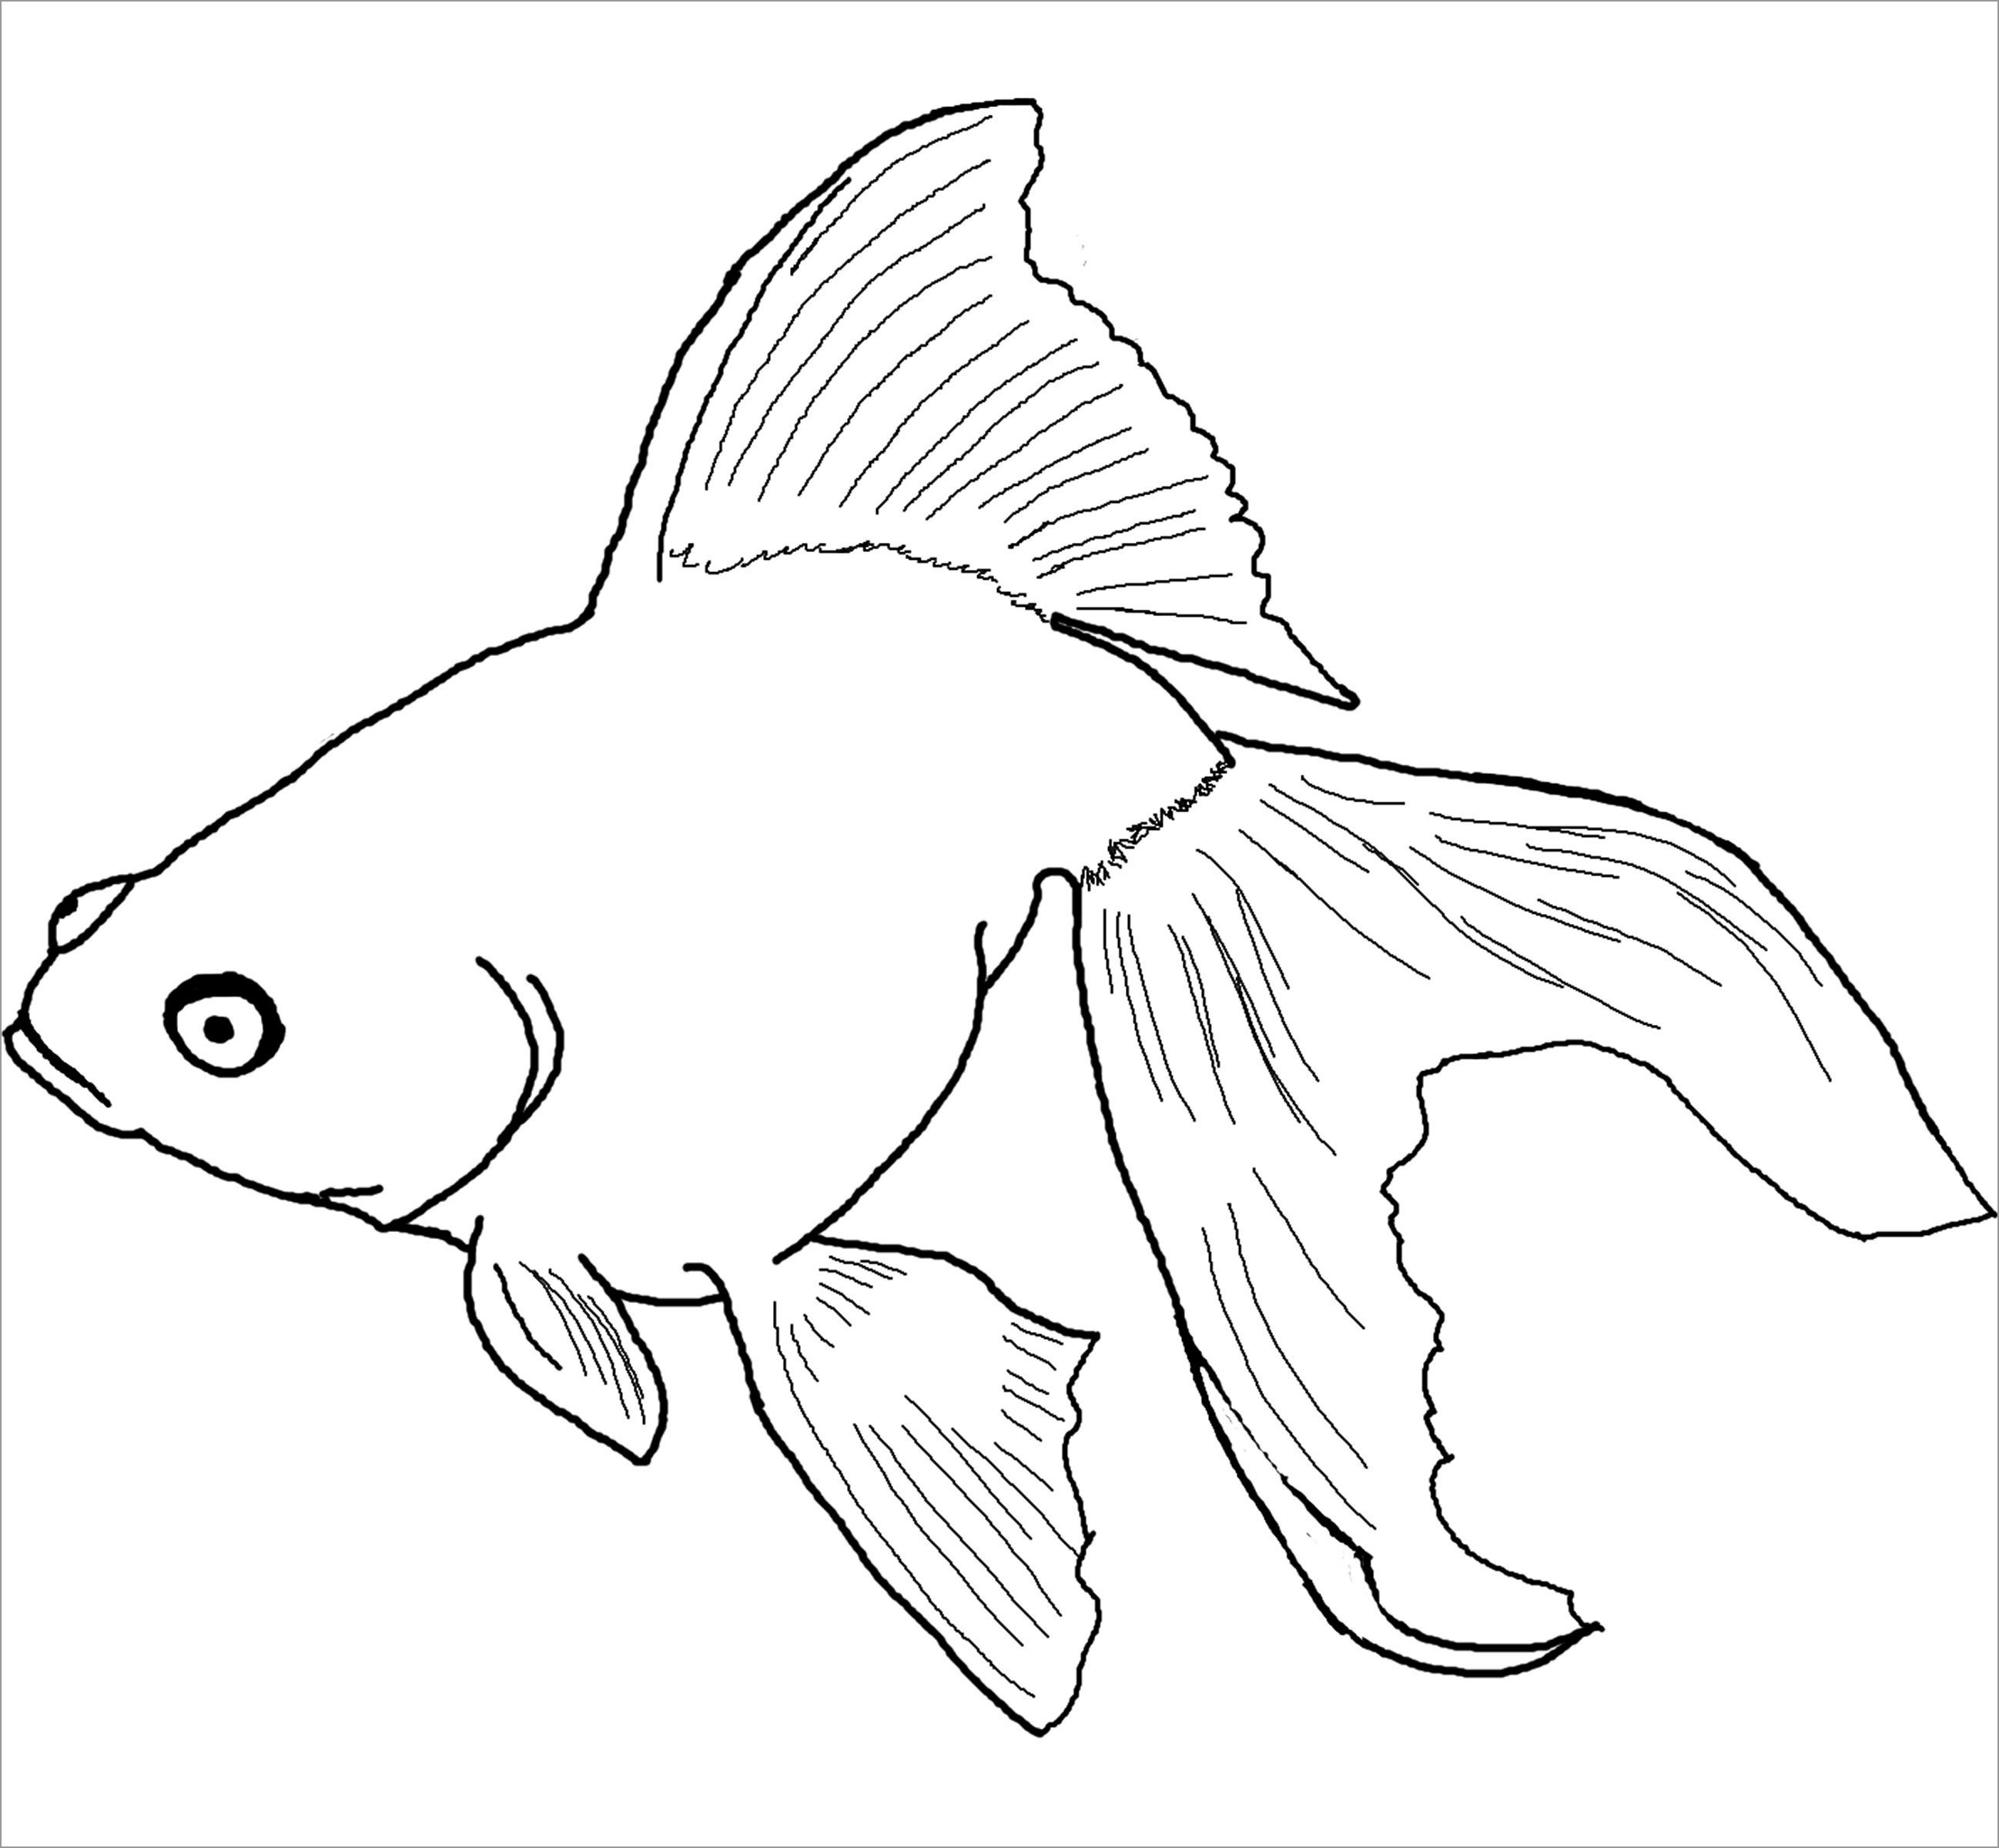 Betta Fish Coloring Pages   Best Coloring Pages For Kids